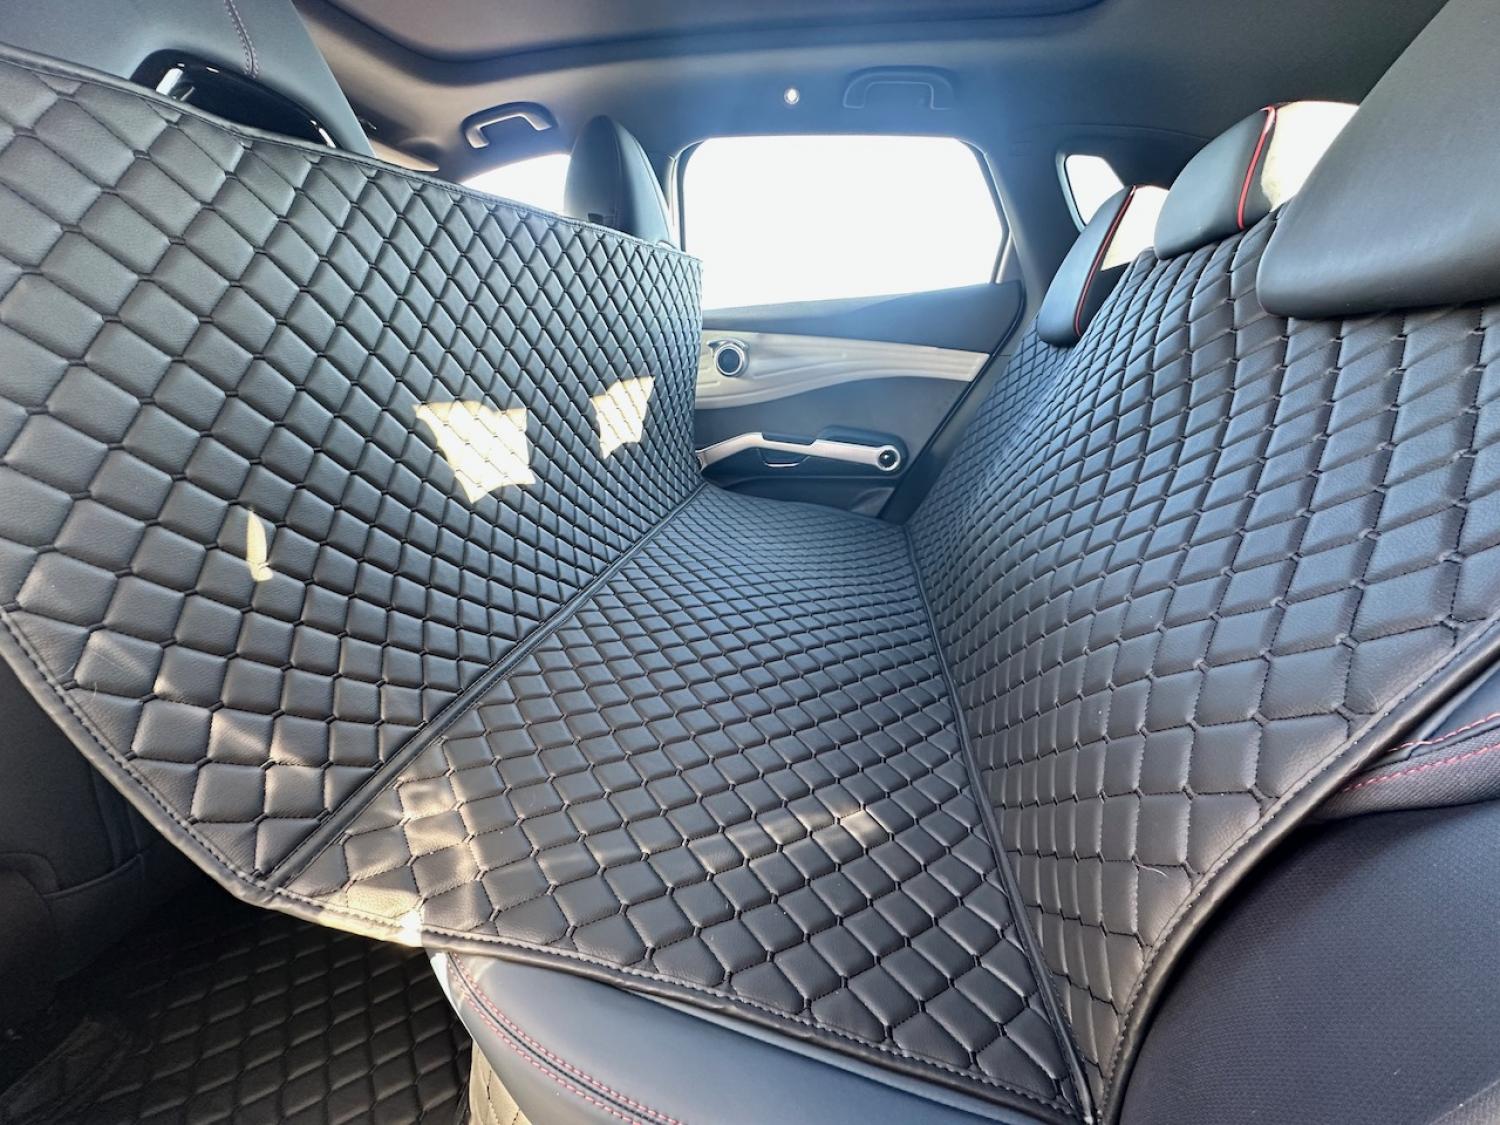 CARSTYLER® Back Seat Cover Geeignet Für Ford Kuga 13, 2012-2019